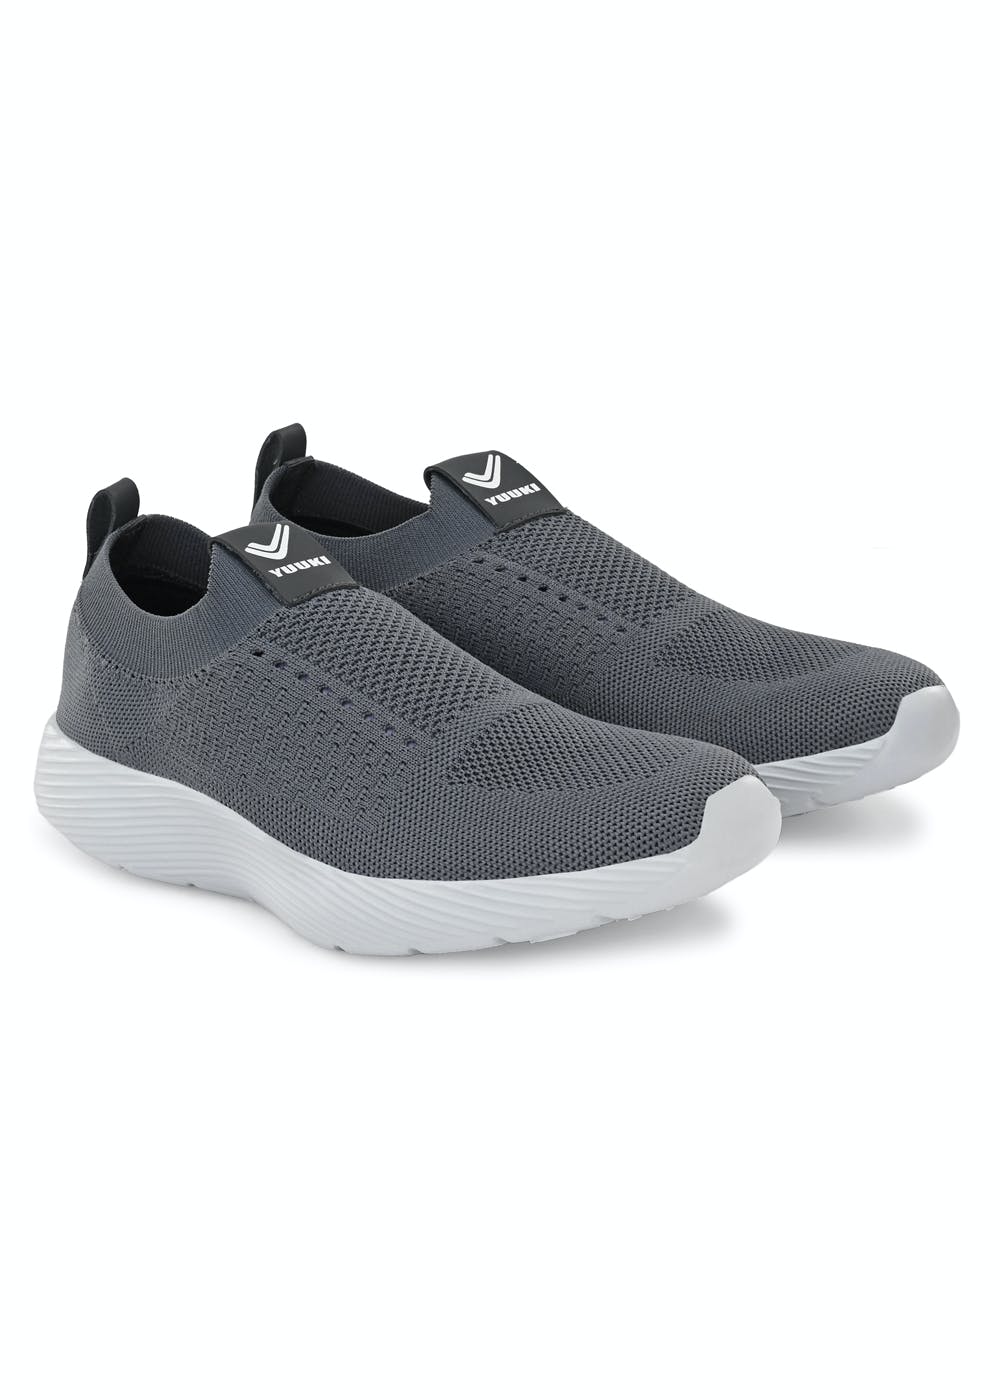 Get White Broad Sole Detail Solid Mesh Textured Slip On Walking Shoes ...